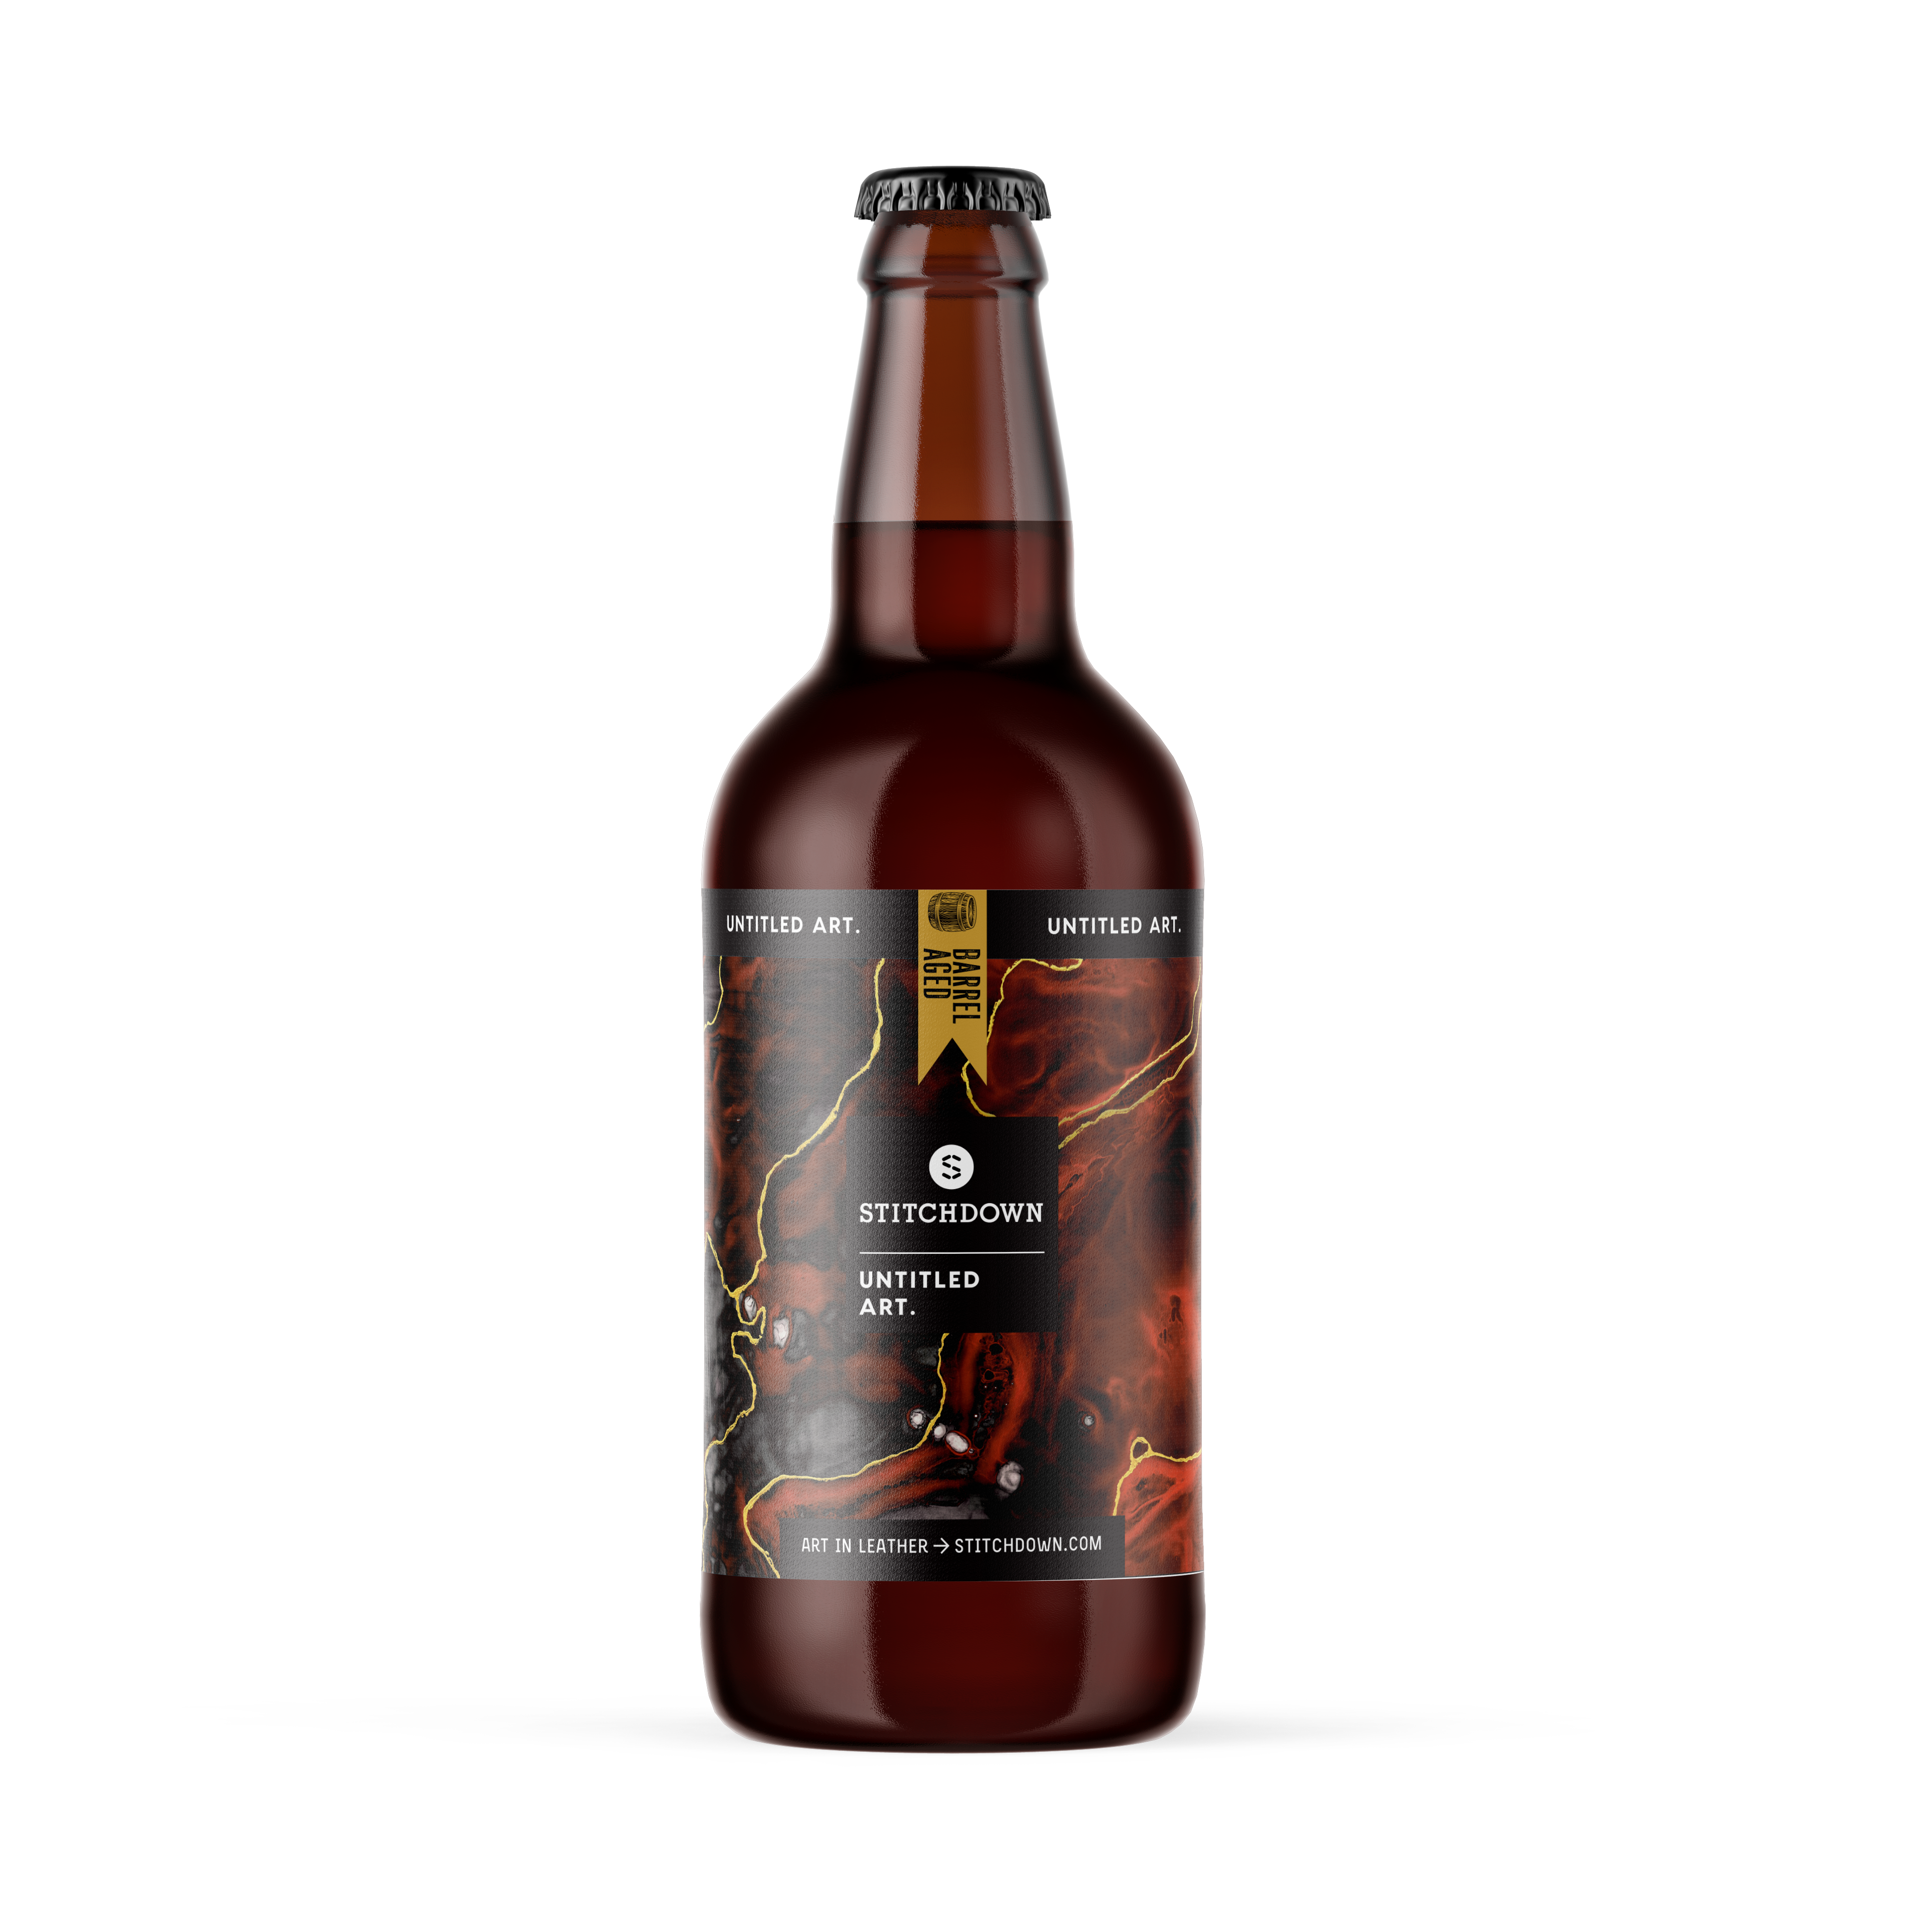 An image of a bottle of beer with a black background. Stitchdown